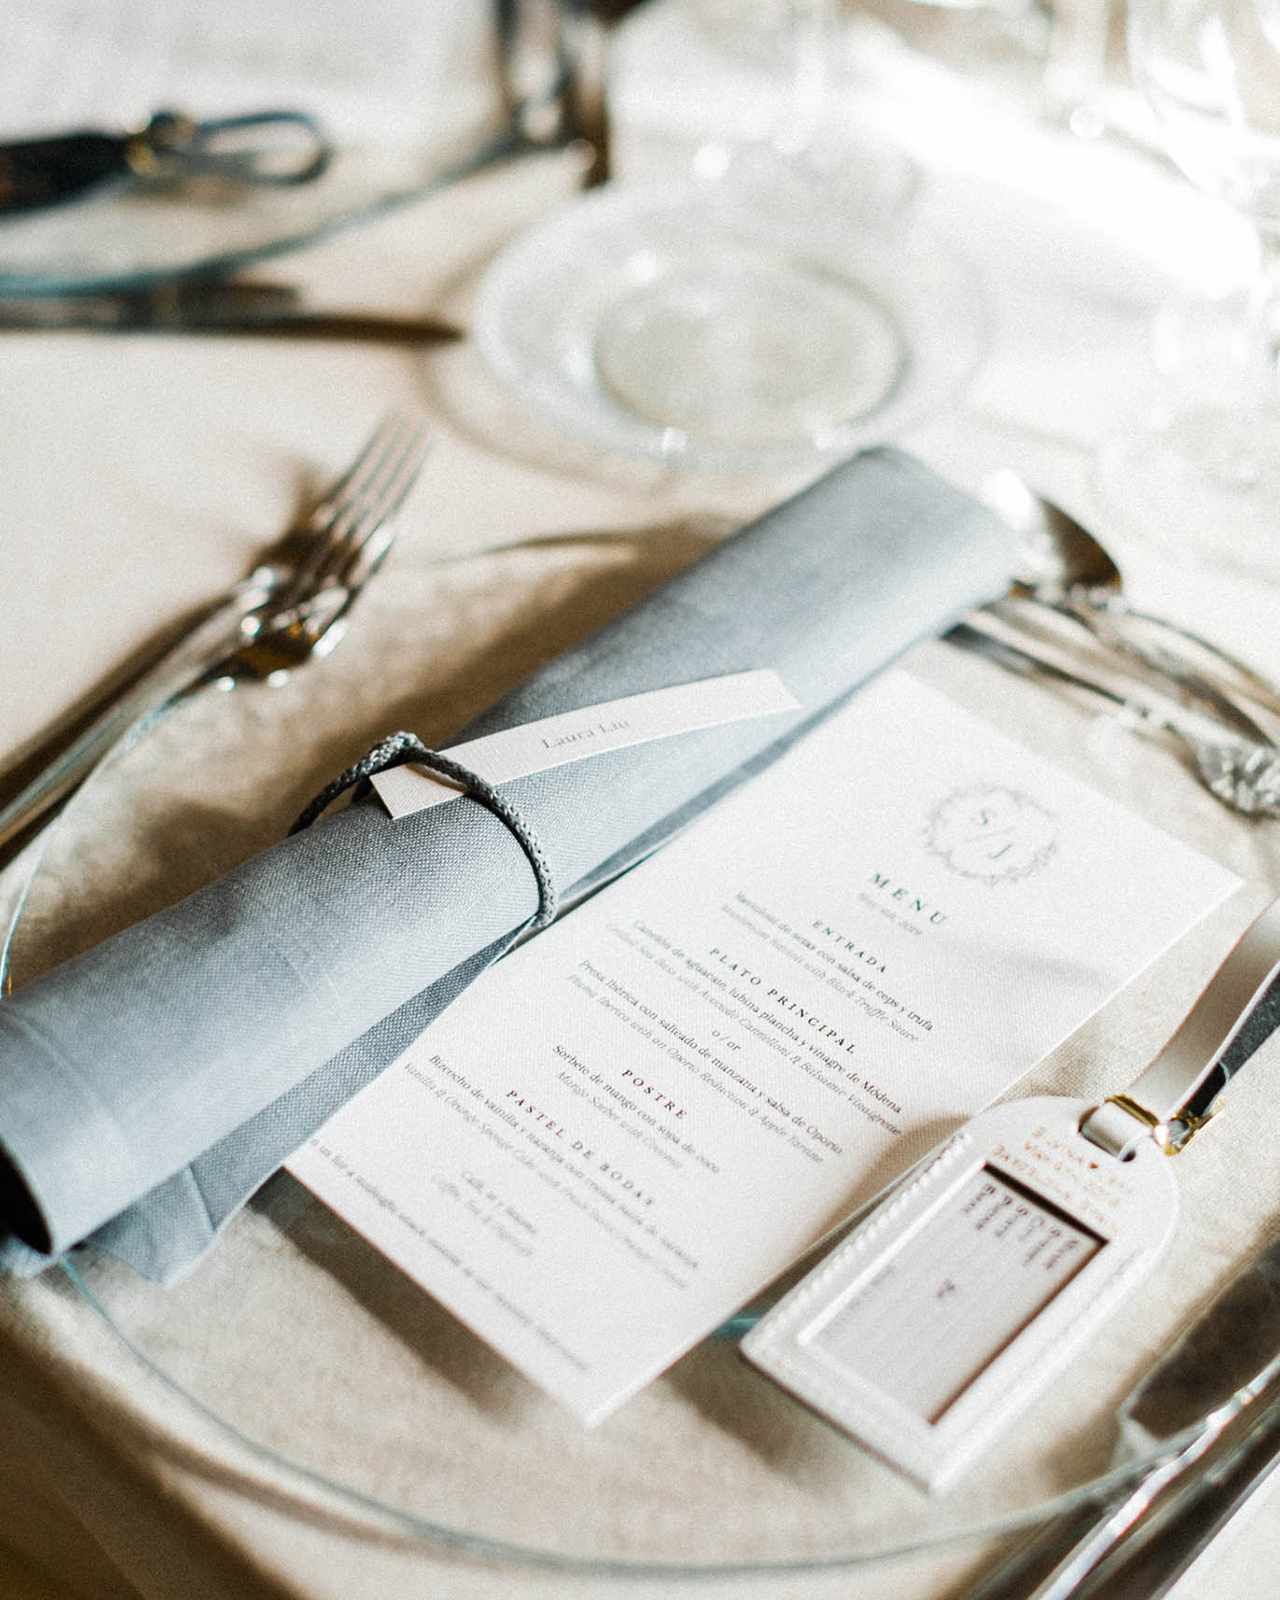 translucent plate with menu and luggage tag favor